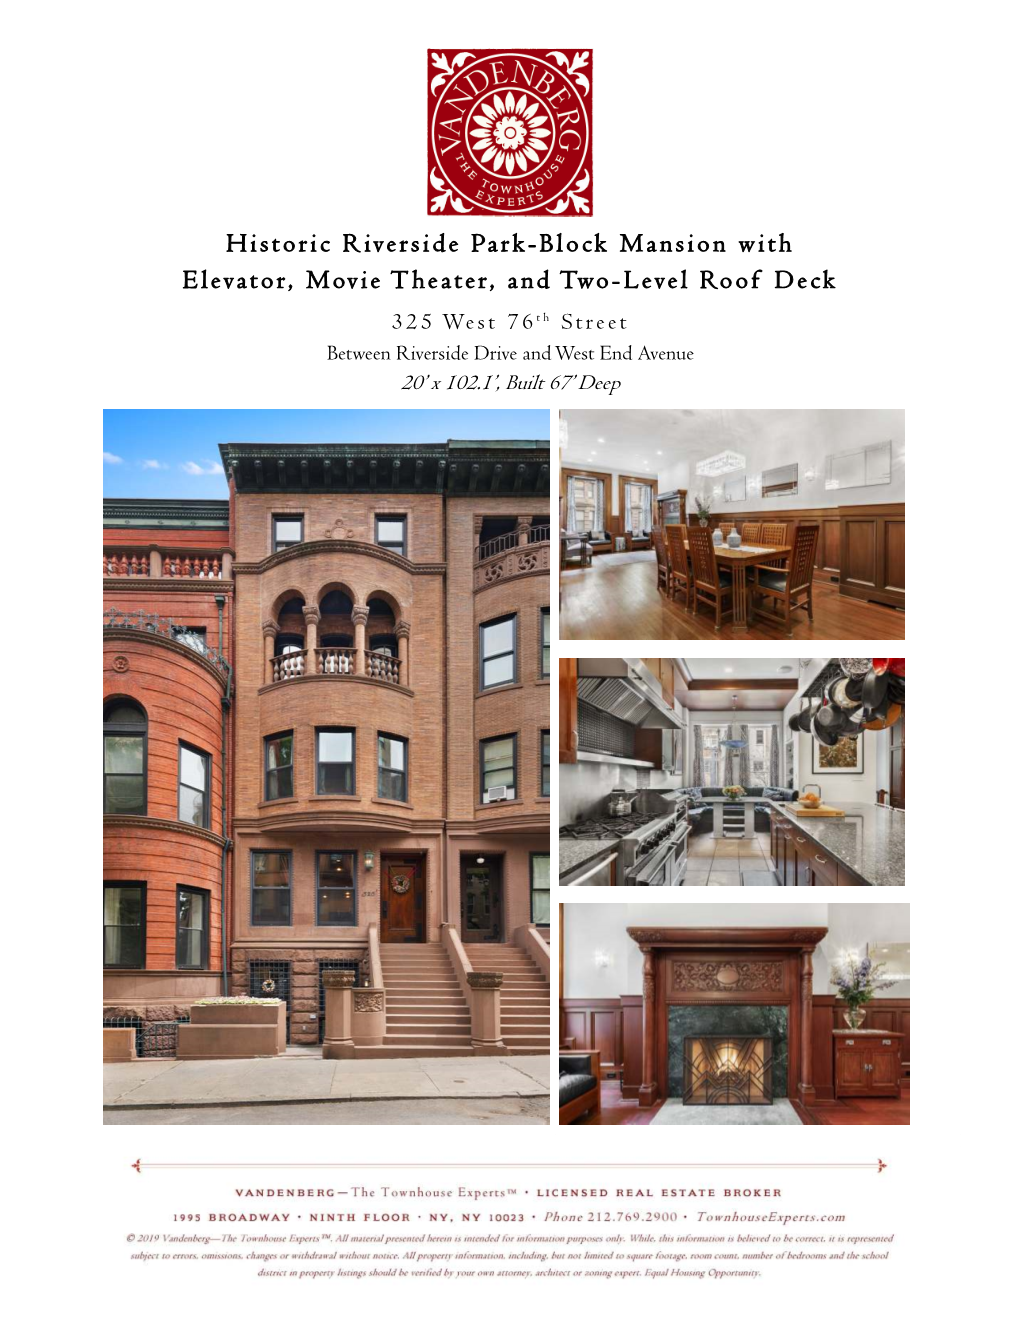 Historic Riverside Park-Block Mansion with Elevator, Movie Theater, And